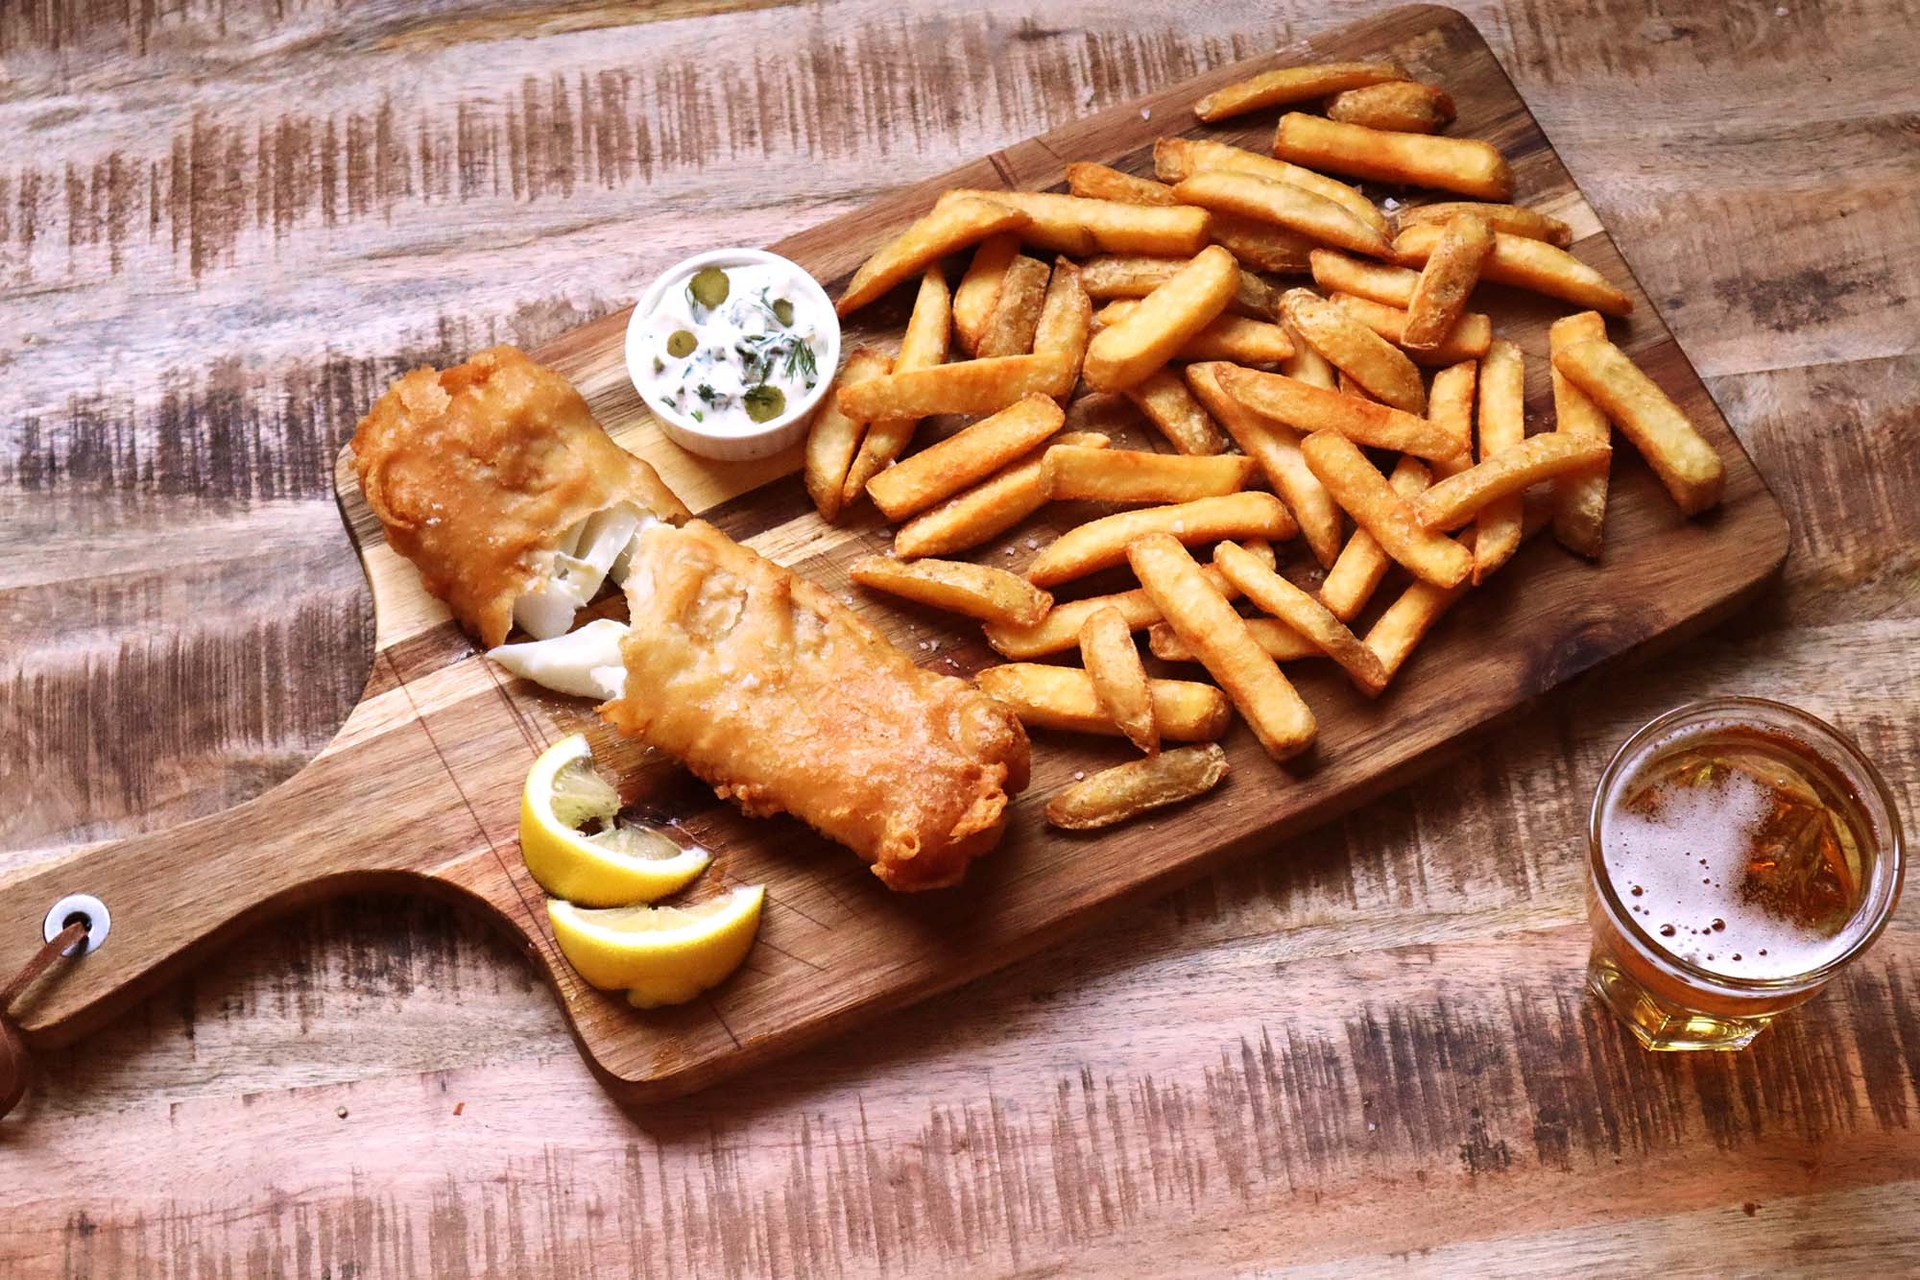 SuperCrunch Pure & Rustic Fish & Chips